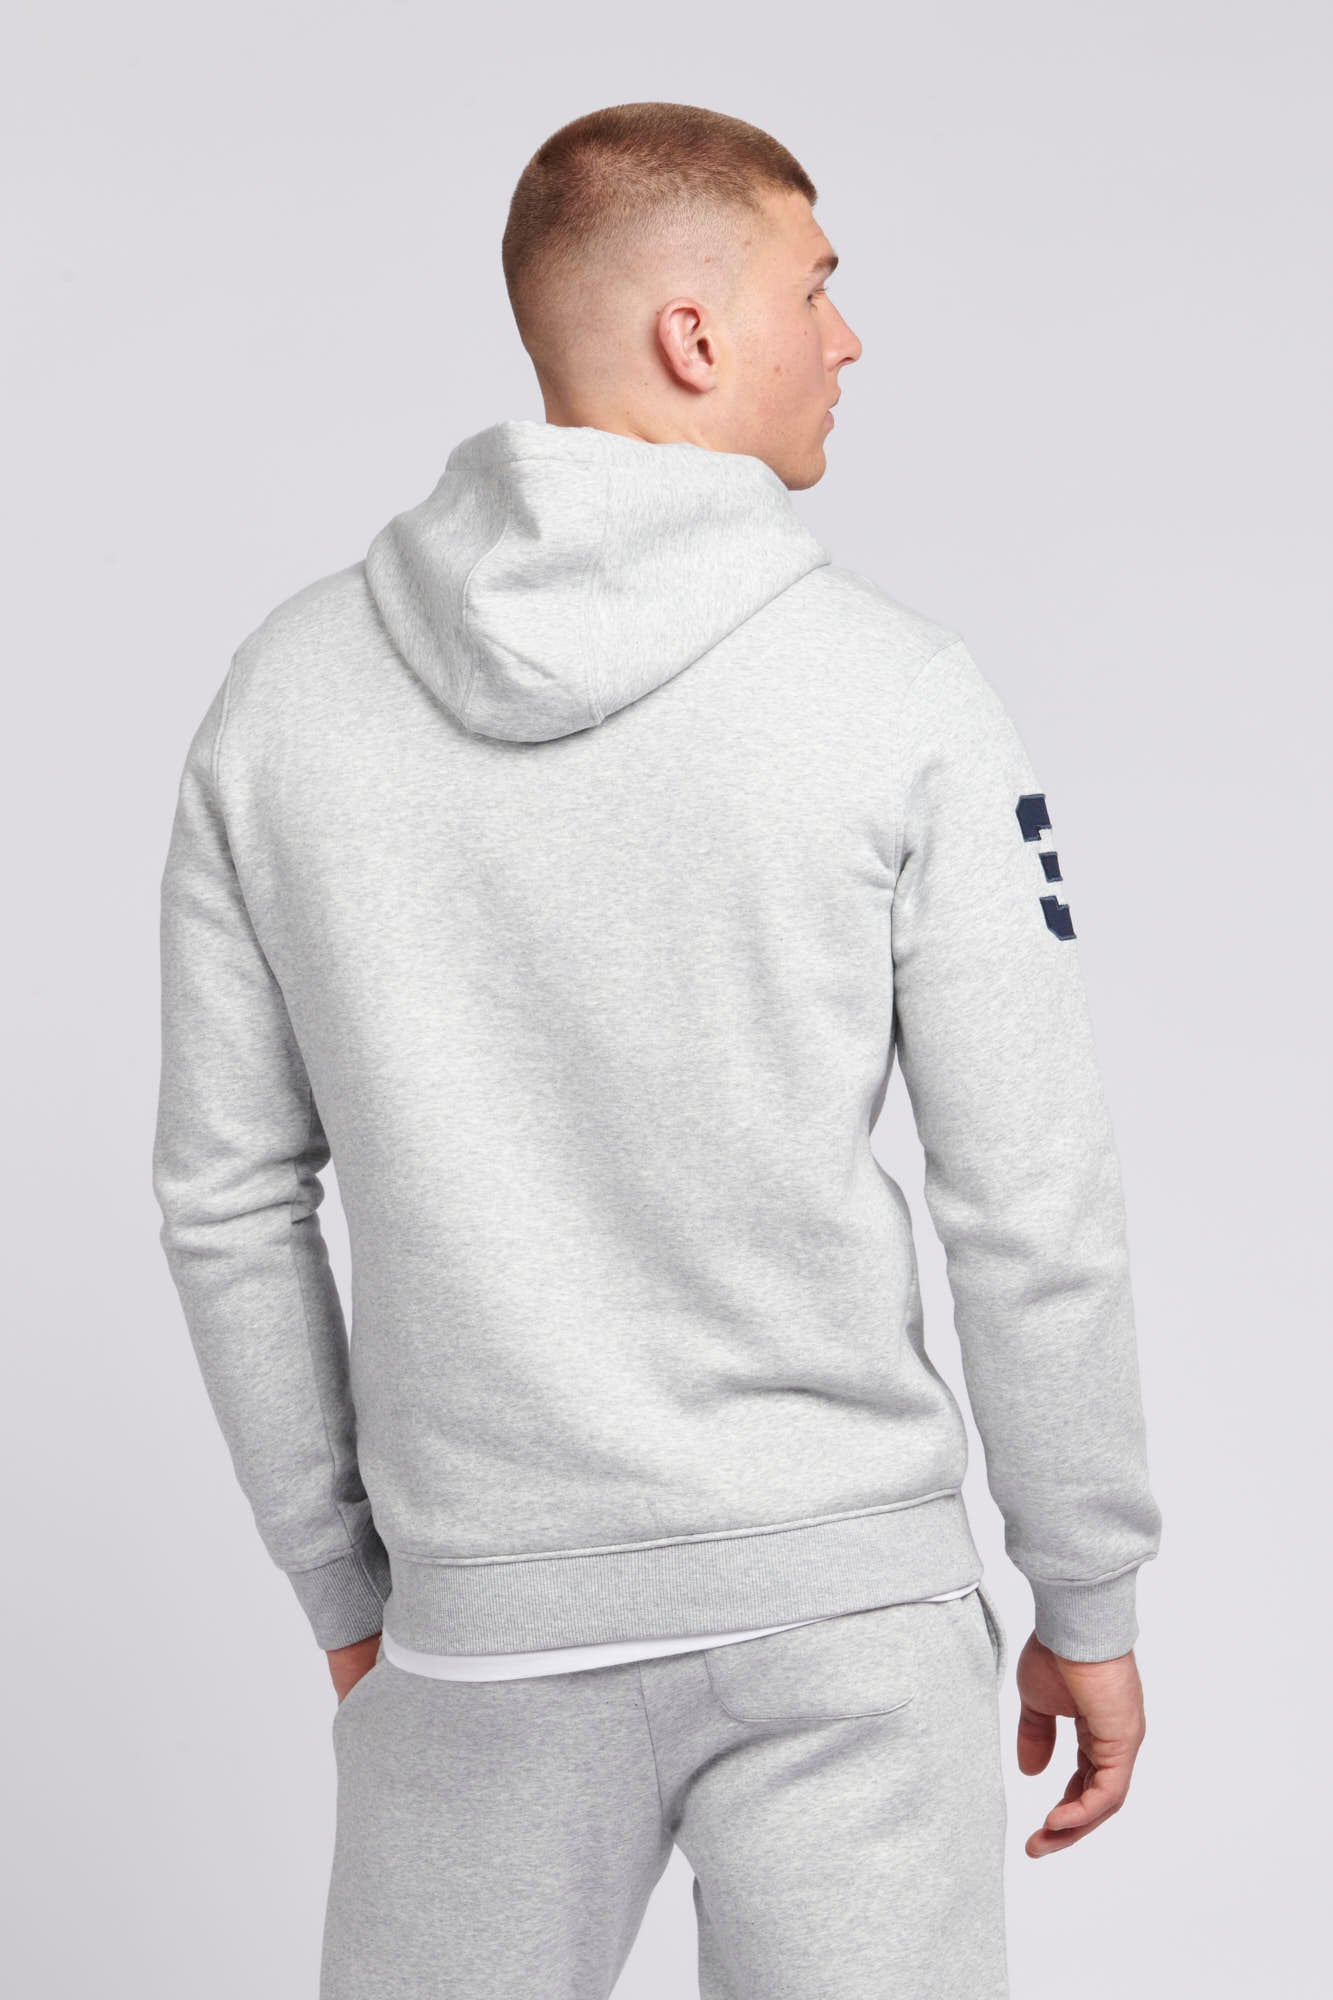 Mens Classic Fit Player 3 Hoodie in Mid Grey Marl